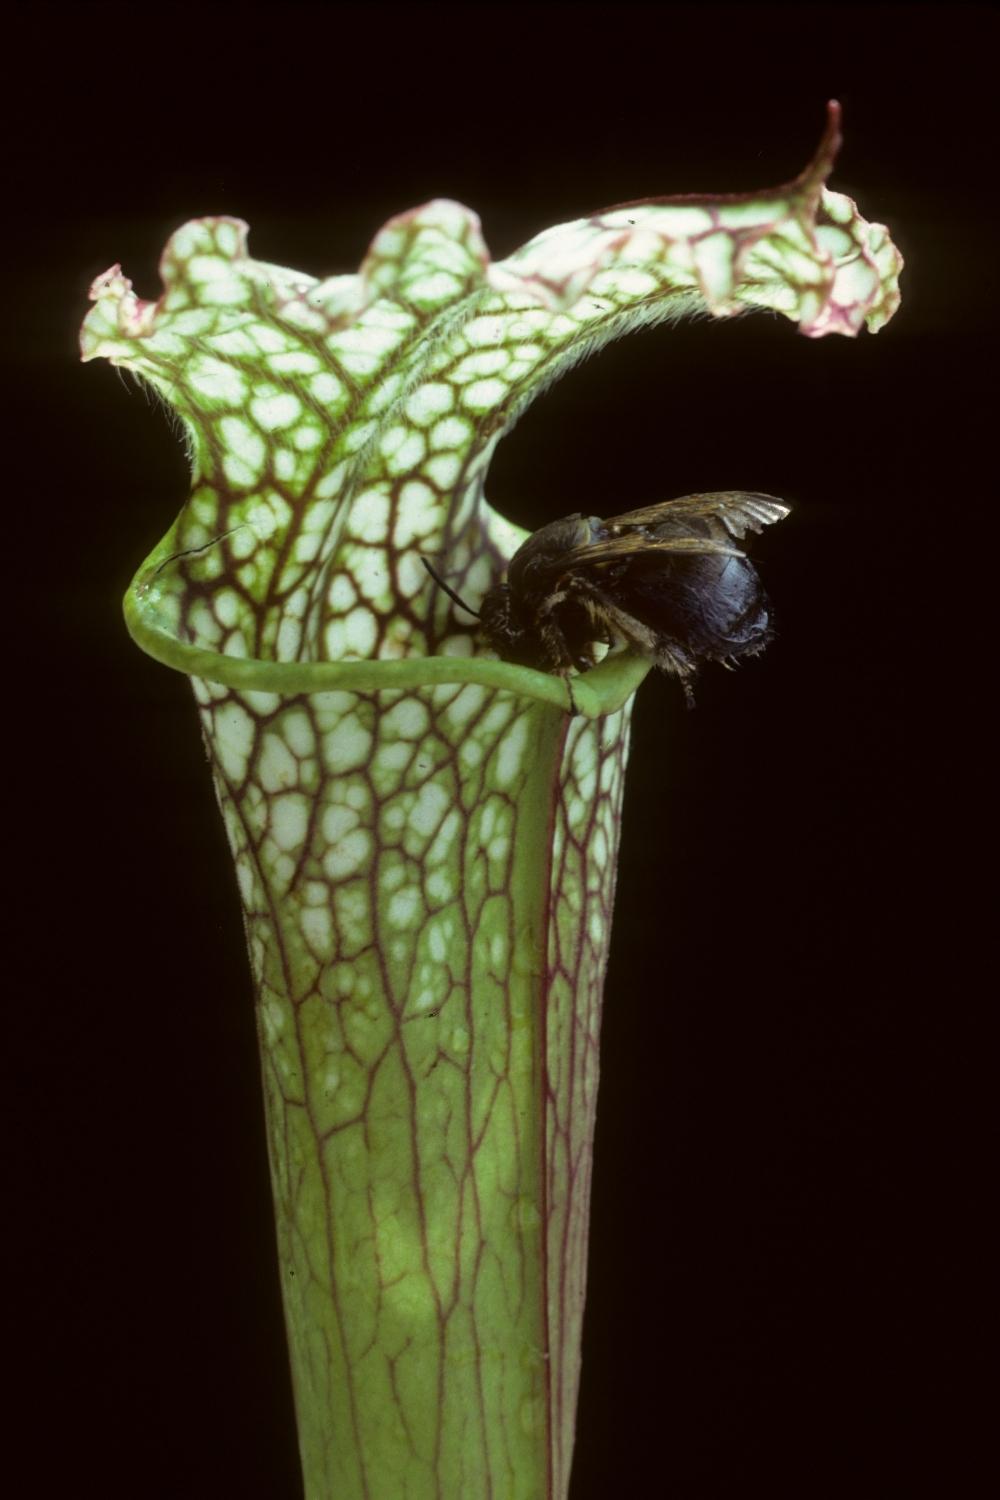 pitcher plant victim at the top of the cavity